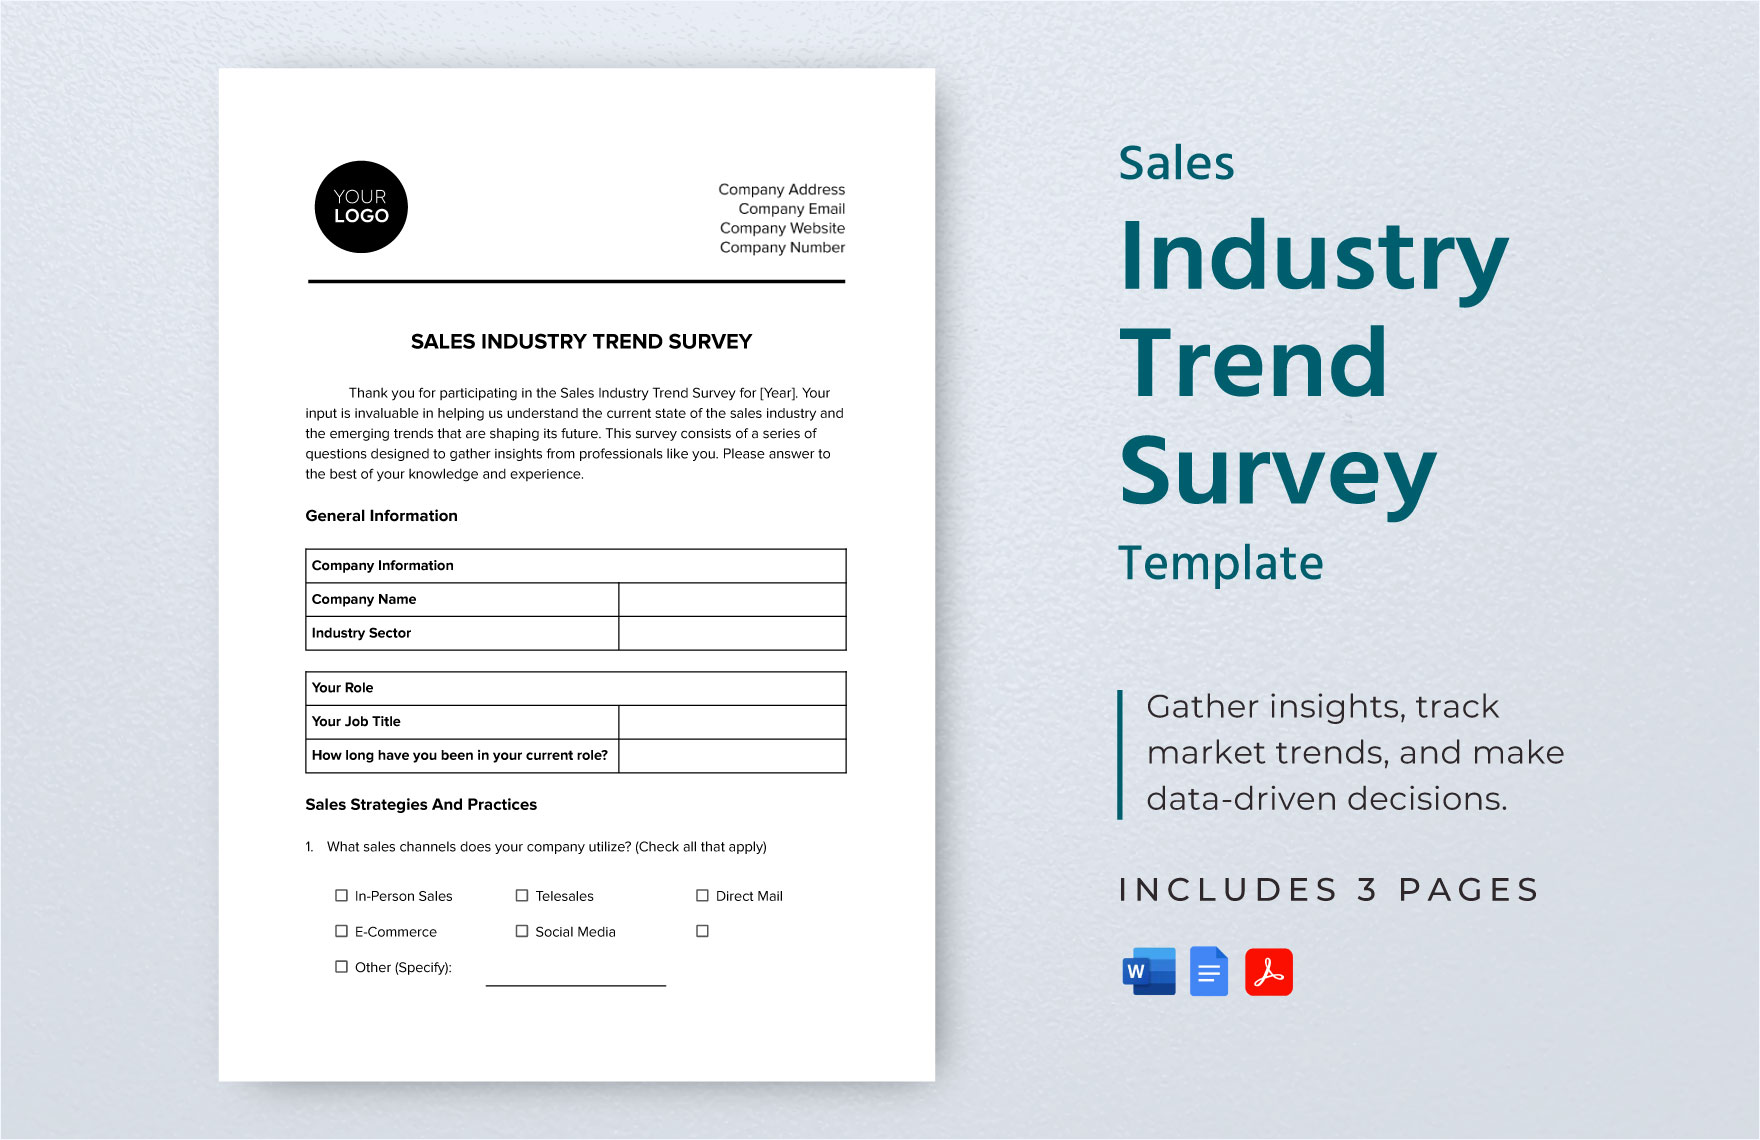 Sales Industry Trend Survey Template